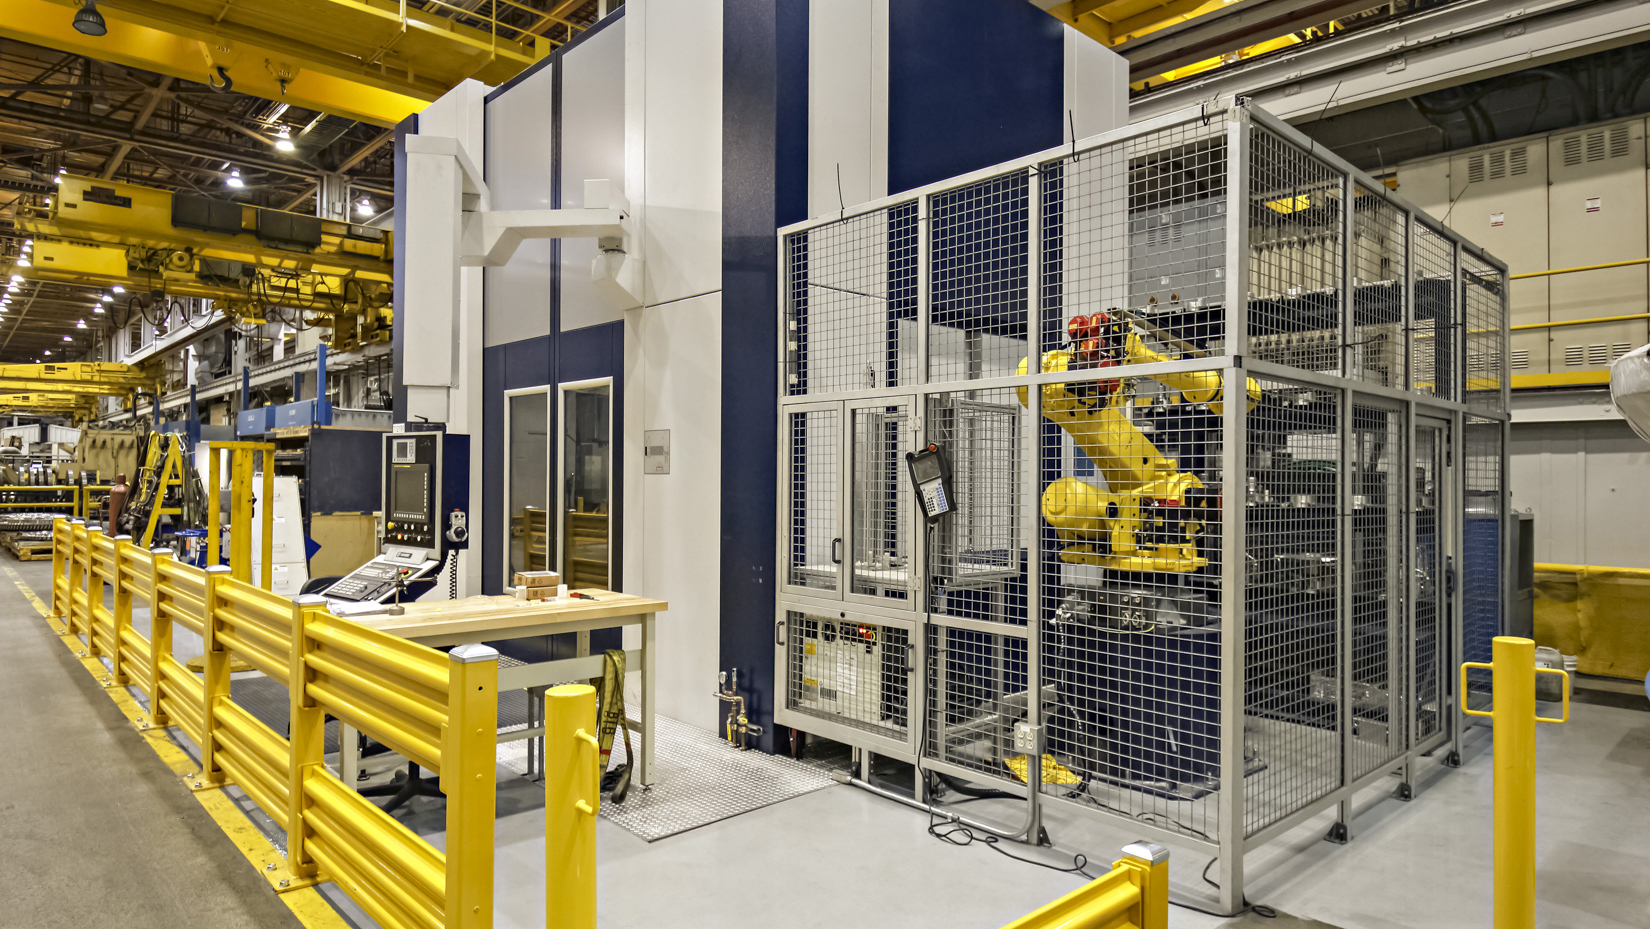 By designing for occupant safety upfront, we help clients mitigate risk of injuries down the road. Pictured here: GE Gas Power in Greenville. Smart design protects industrial facility occupants. 